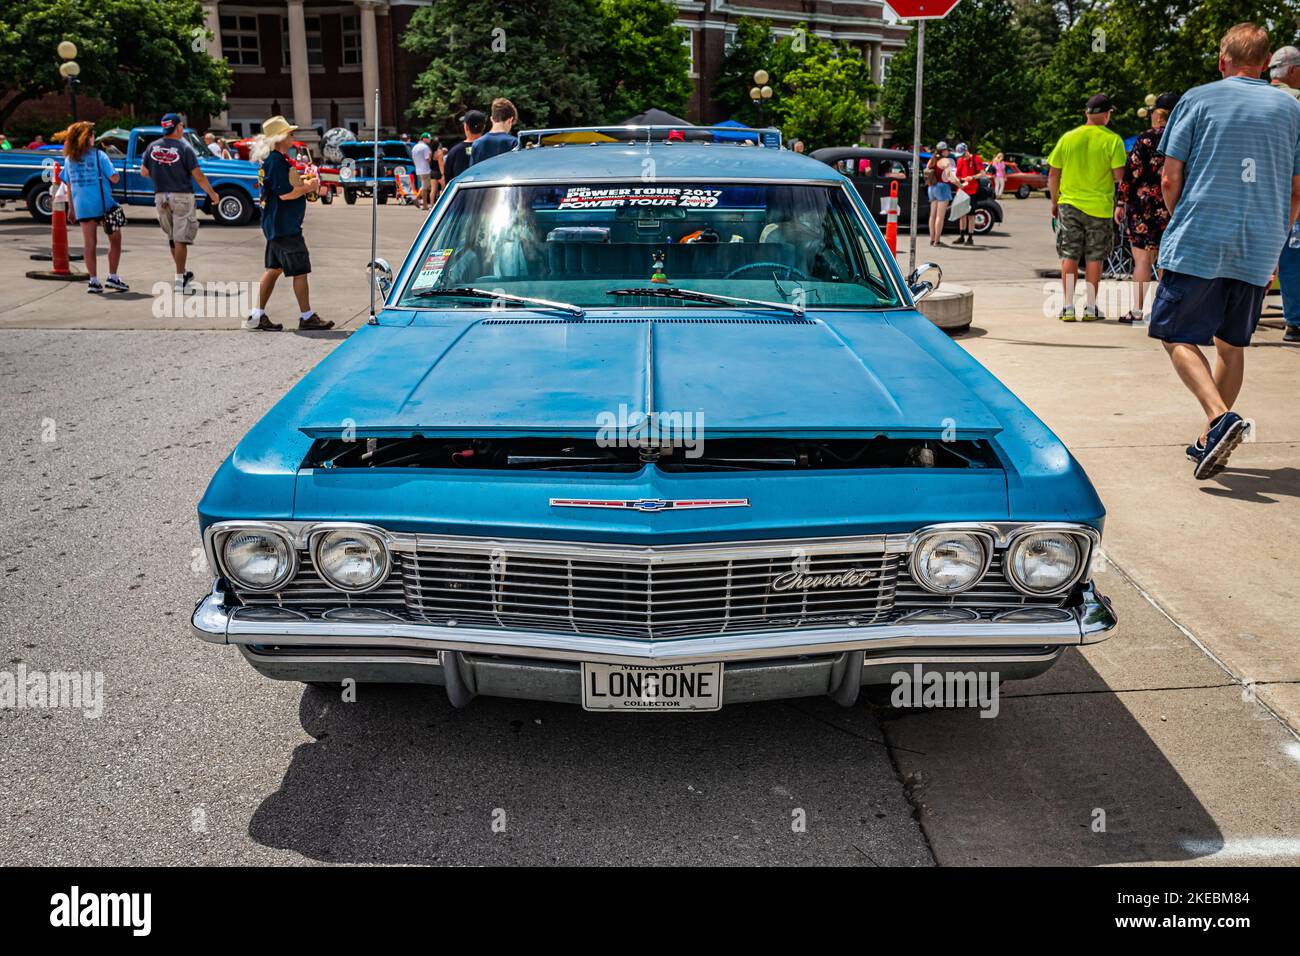 Des Moines, IA - July 02, 2022: High perspective front view of a 1965 Chevrolet Impala Station Wagon at a local car show. Stock Photo